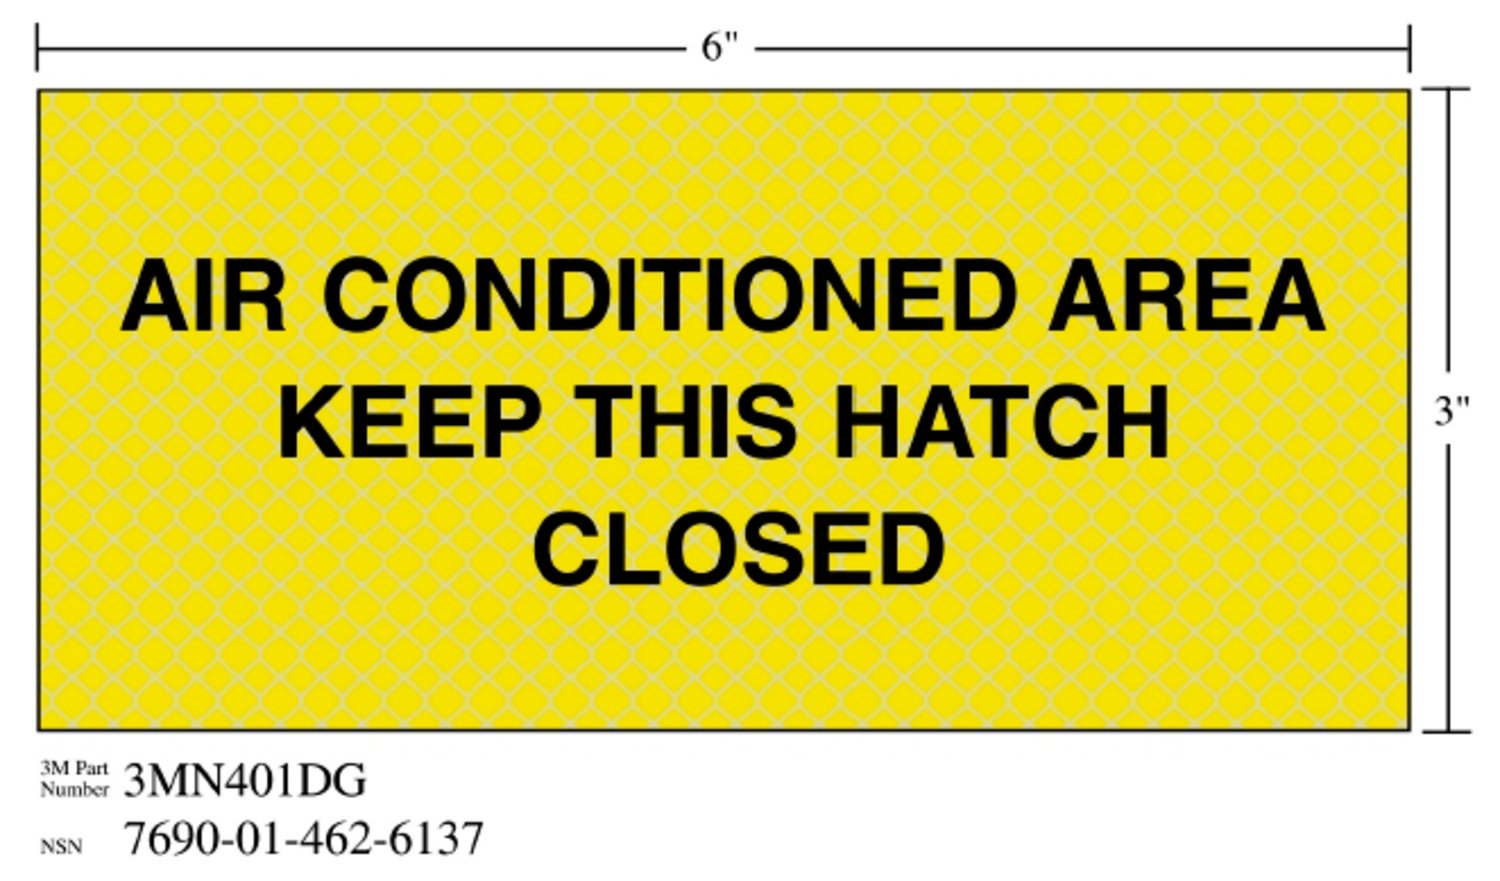 7010343556 - 3M Diamond Grade Ventilation Sign 3MN401DG, "AIR…HATCH CLOS", 7 in x 3
in, 10/Package